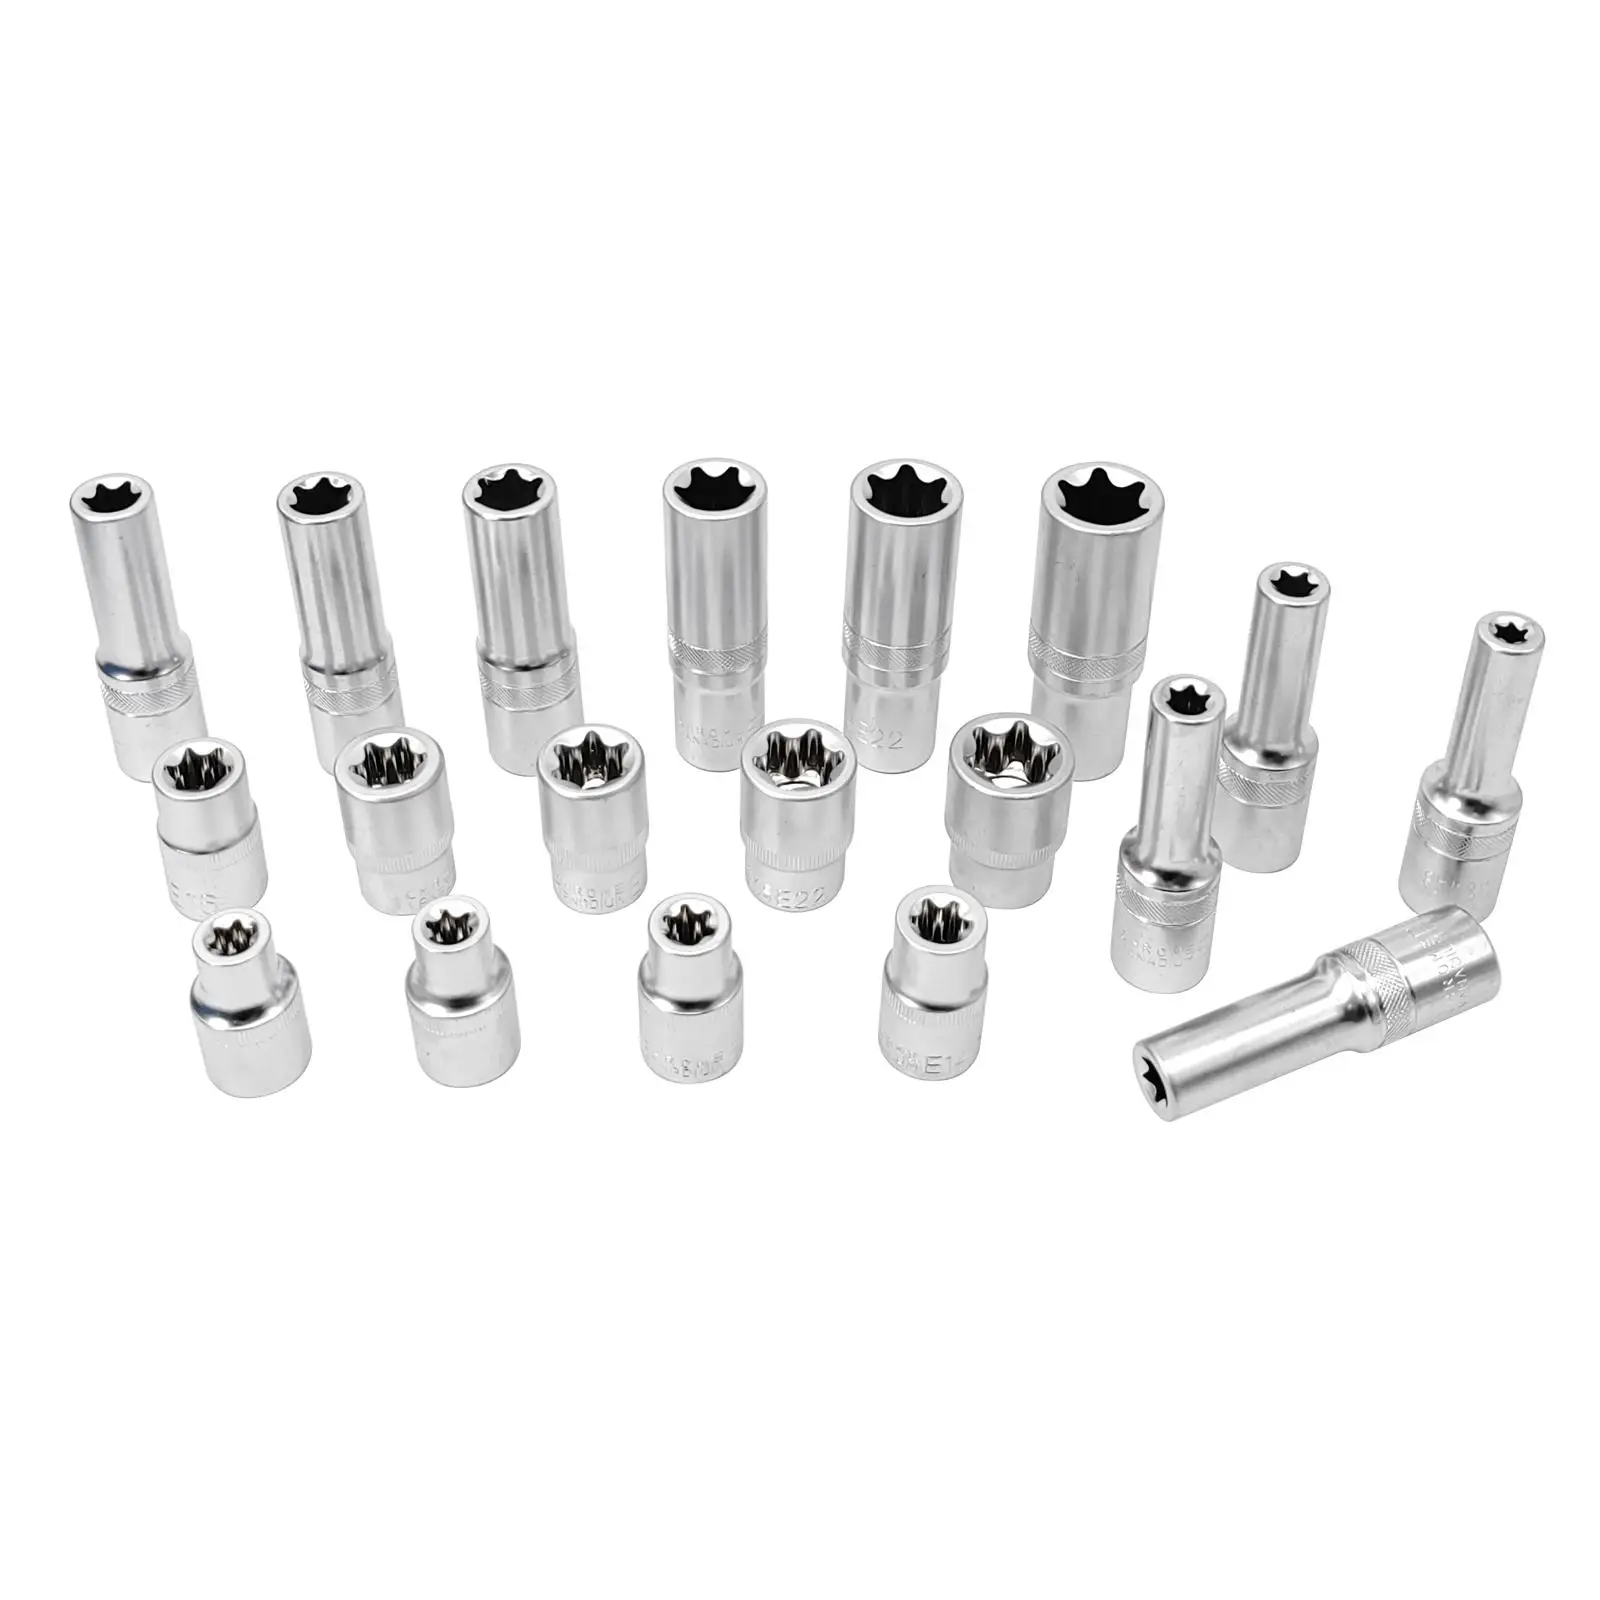 Female Bit Socket Set for Fastener Removal for Motorcycle Car Vehicle 1/2inch Drive